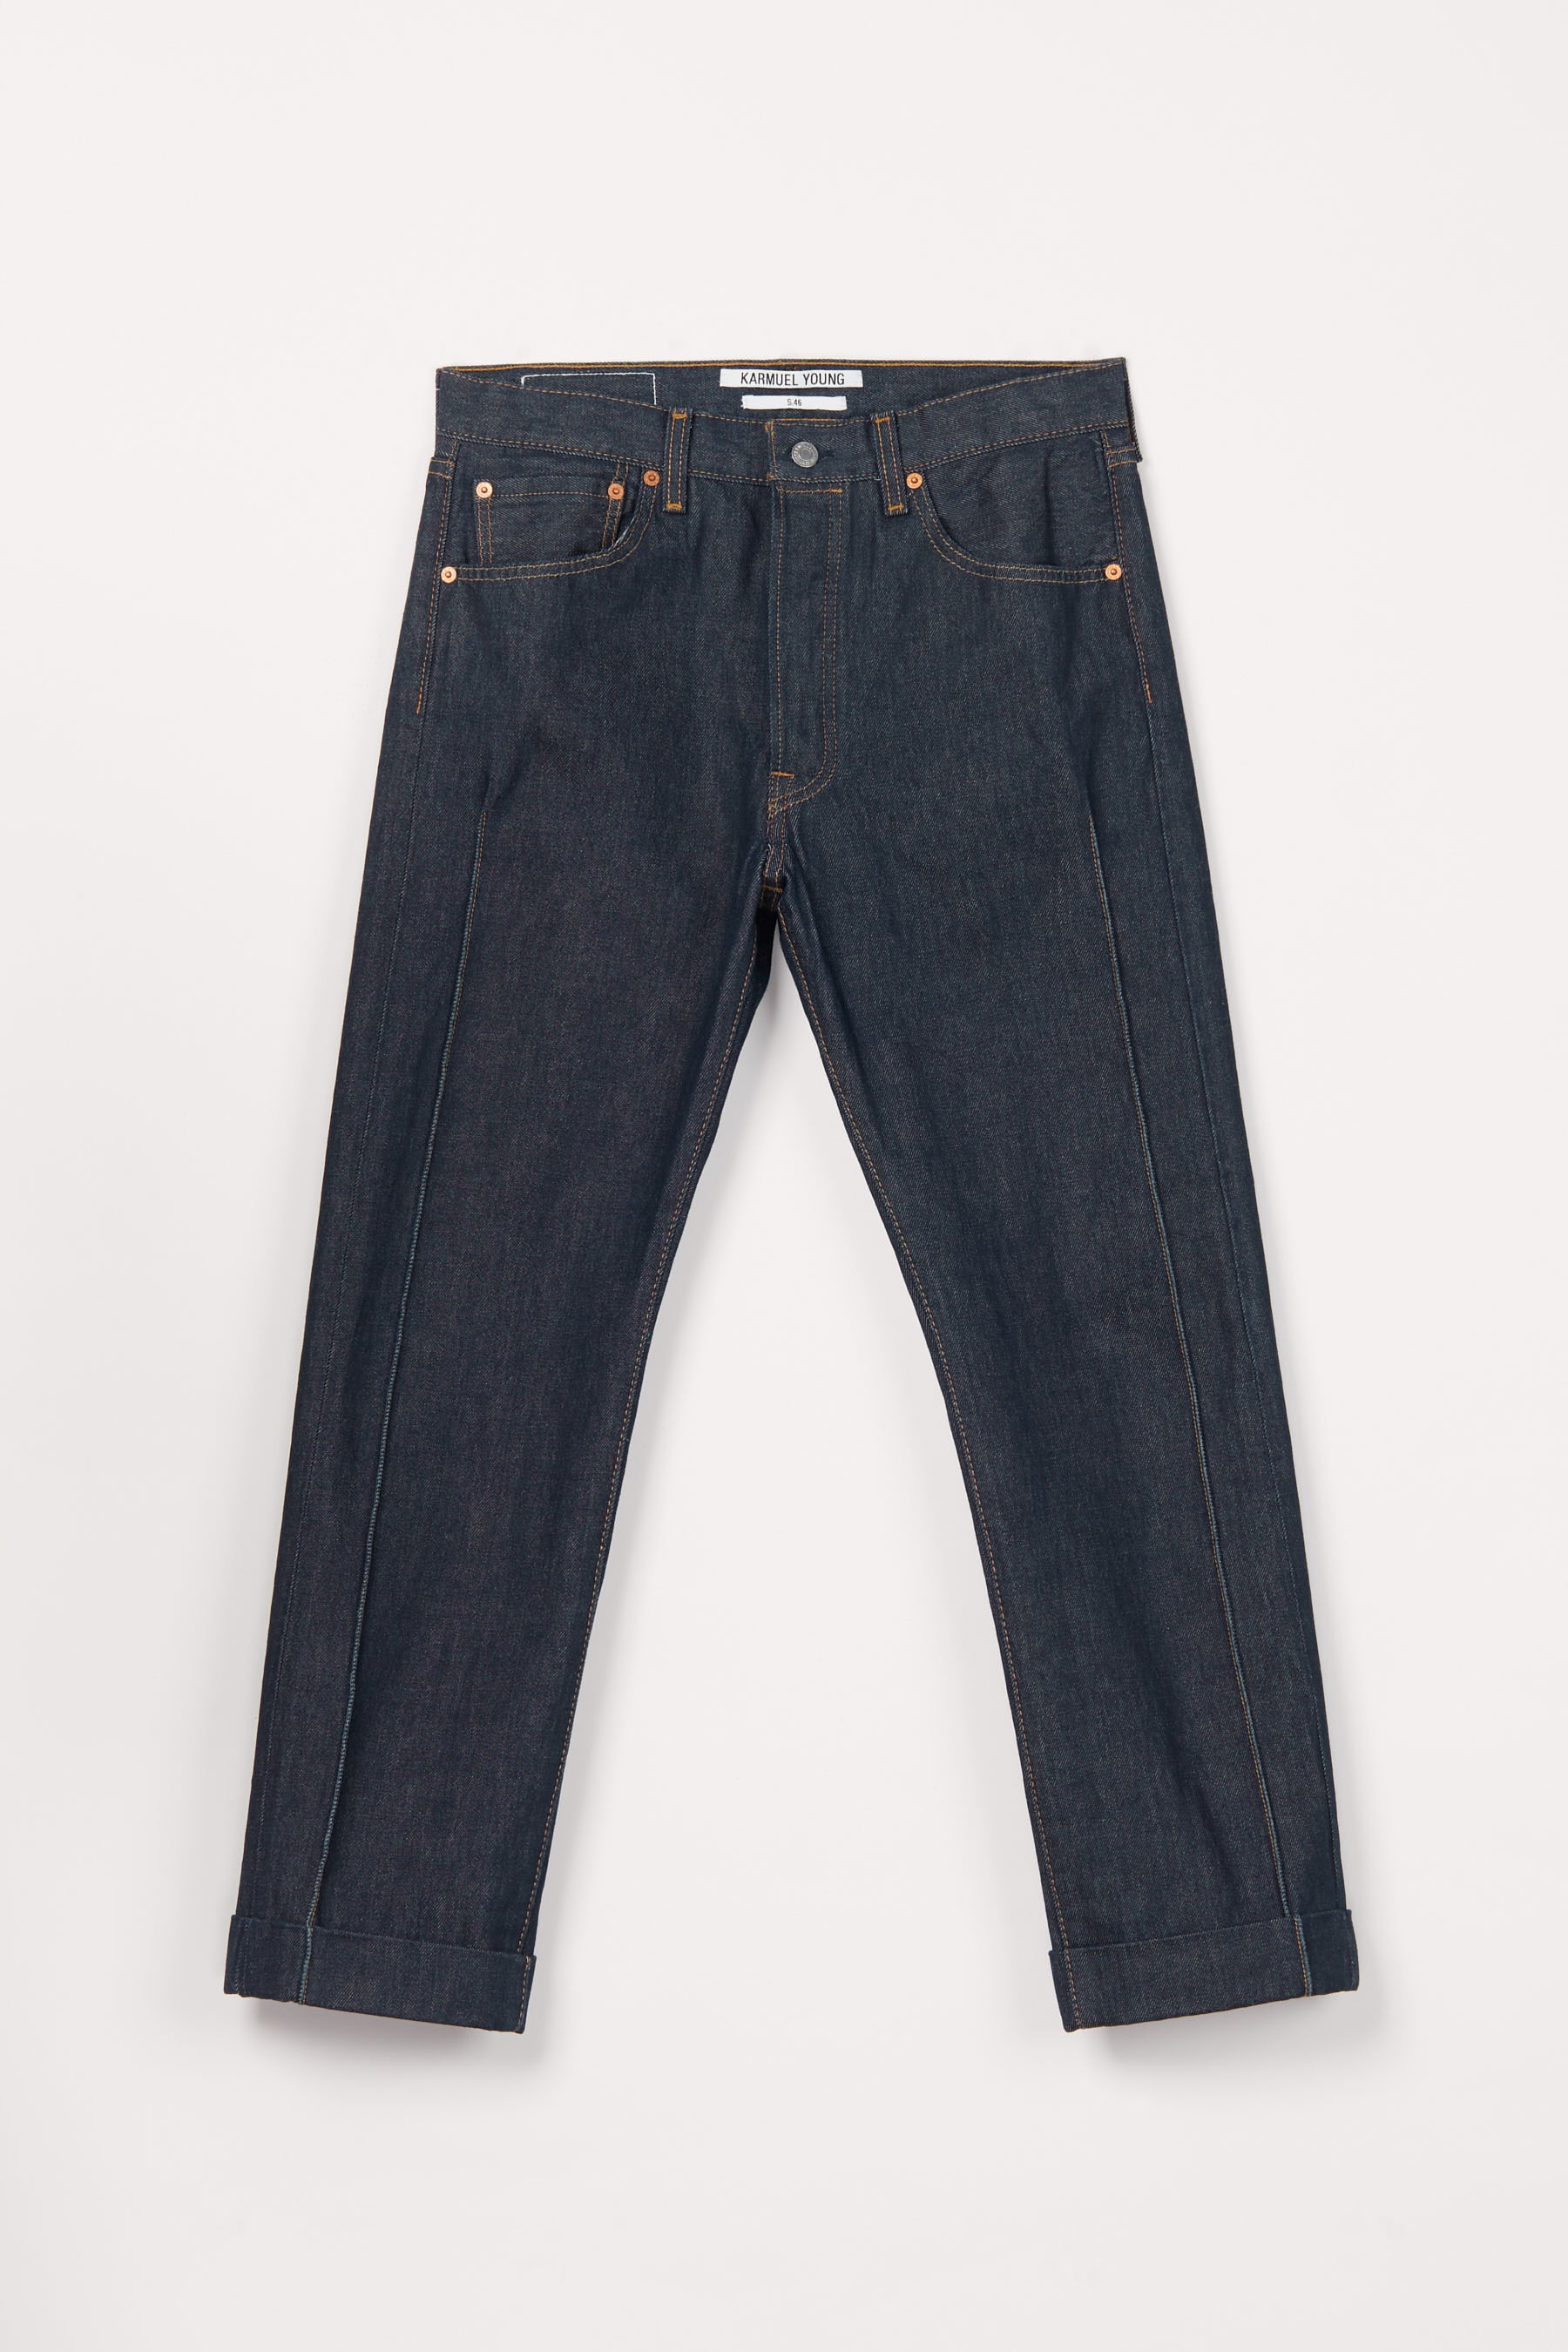 RE-edited Navy Rinse Wash Cuboid Levi's 501 jeans